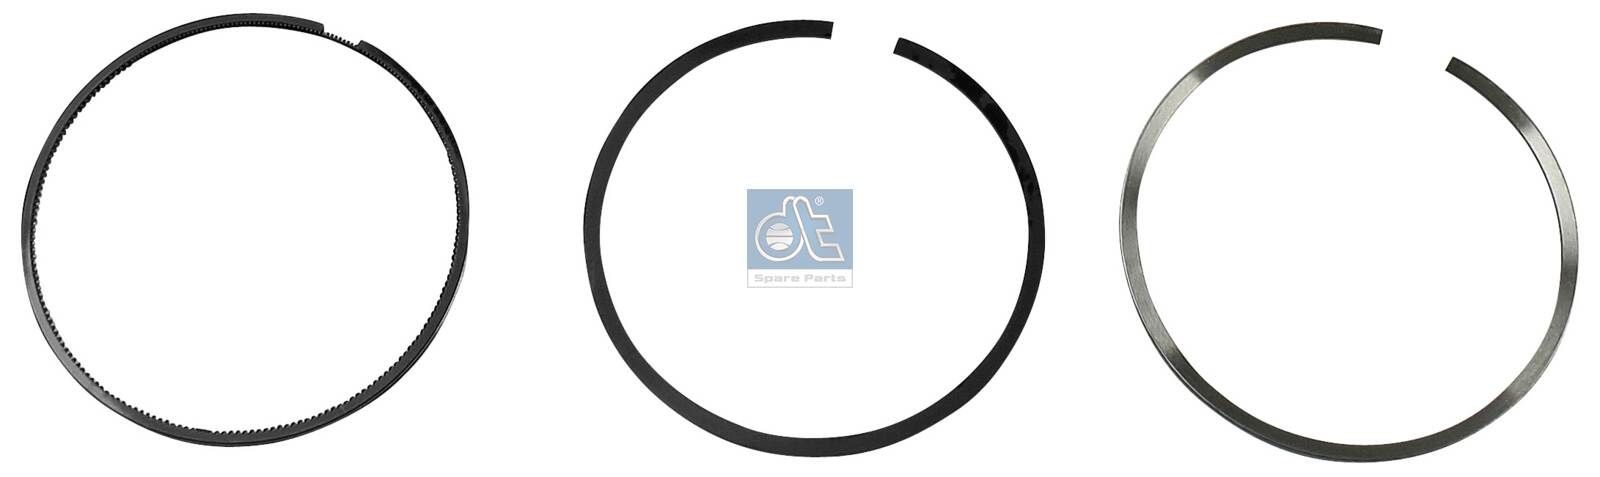 DT Spare Parts 7.94509 Piston Ring Kit FIAT experience and price